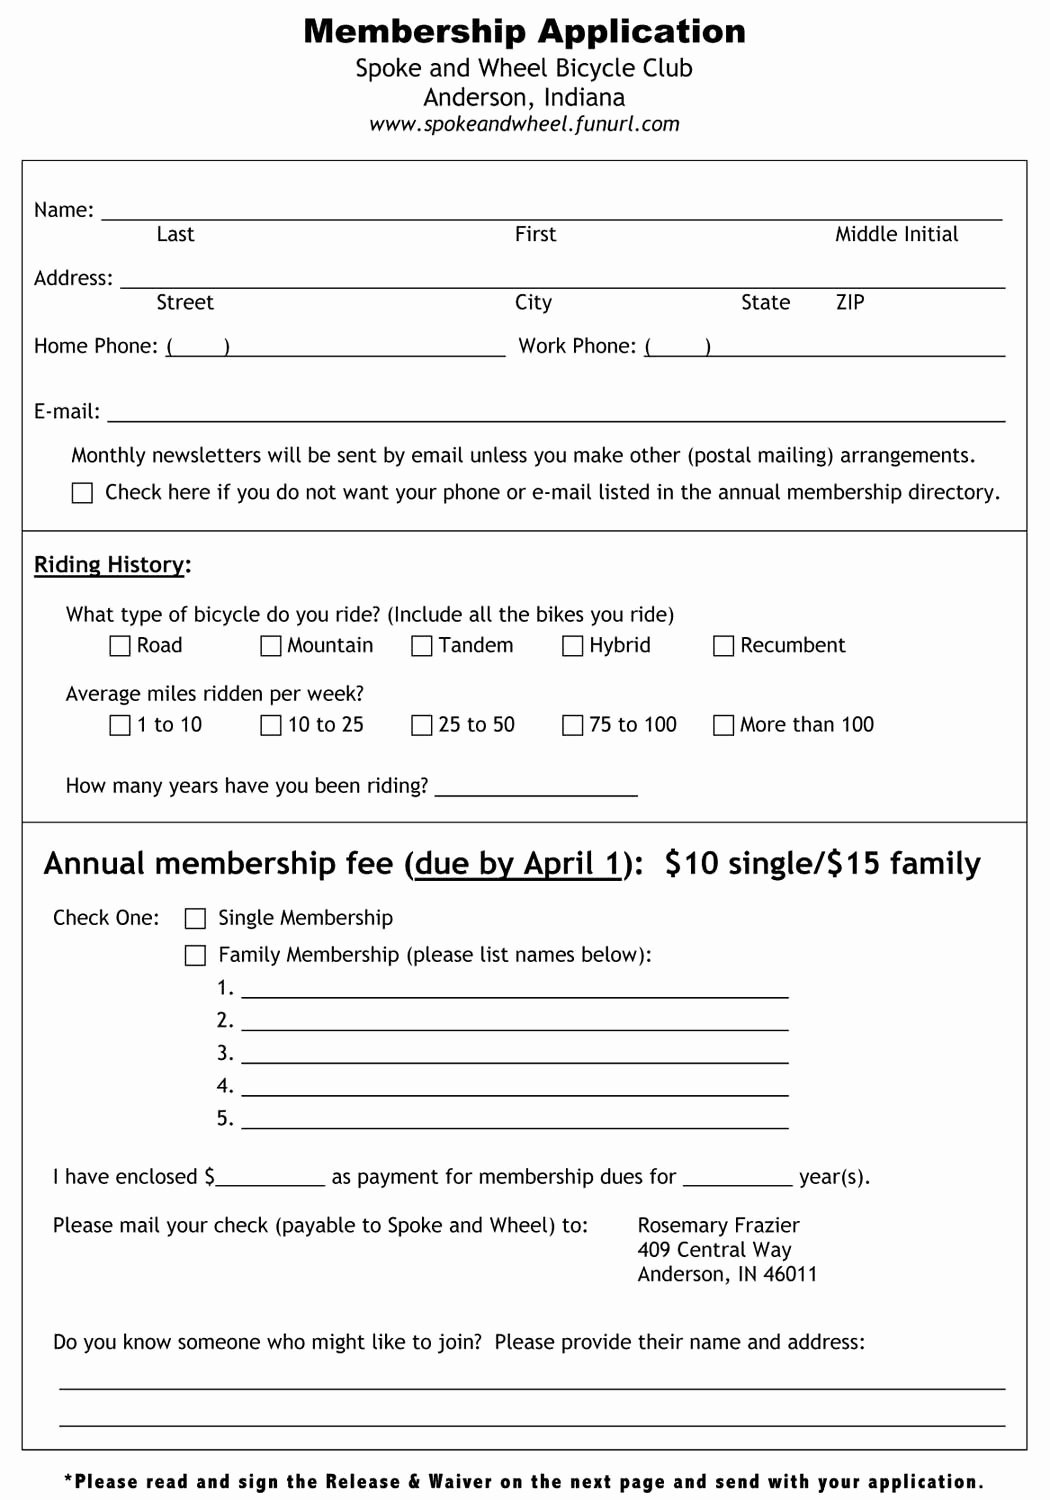 Club Membership Application Template Awesome Spoke and Wheel Bicycle Club anderson Indiana Membership